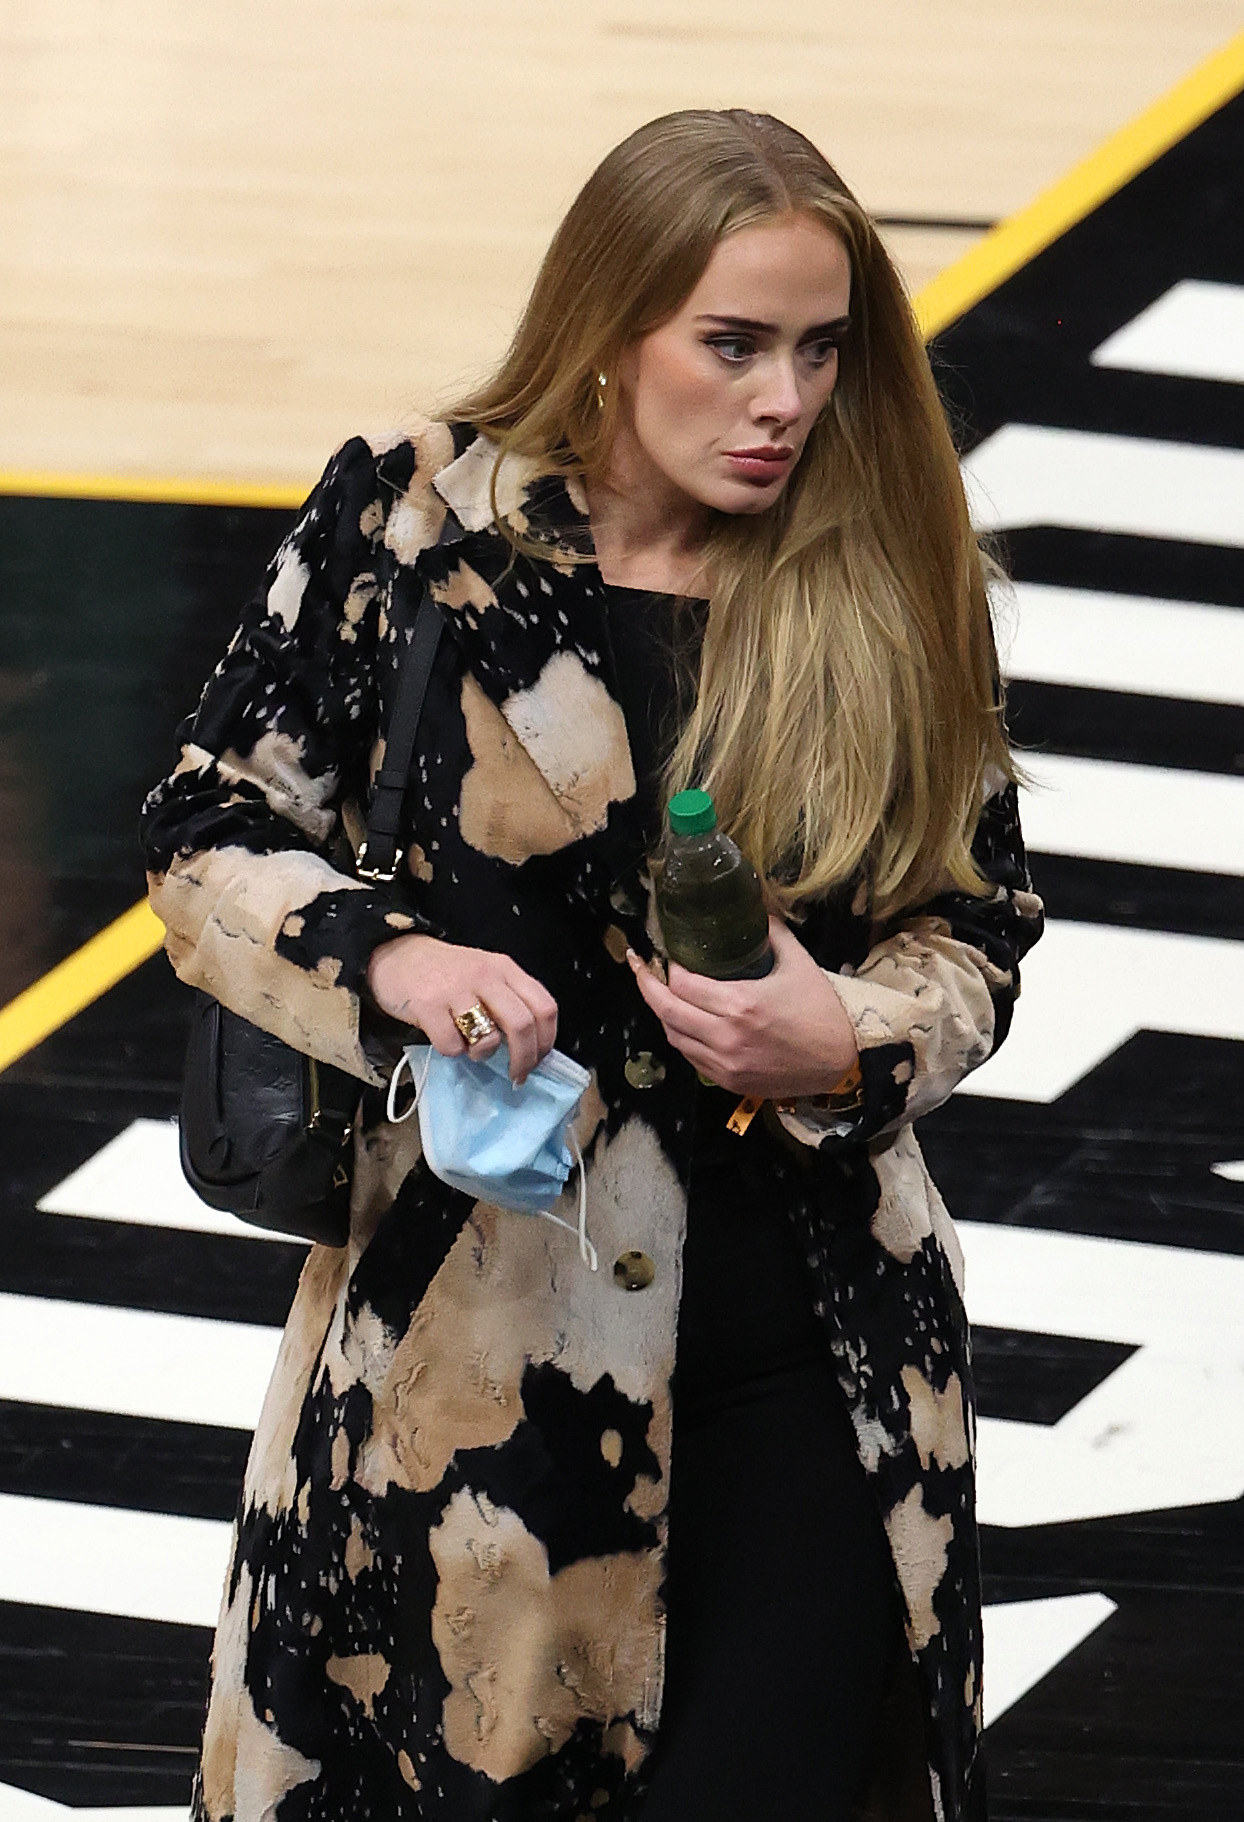 The singer attends a basketball game